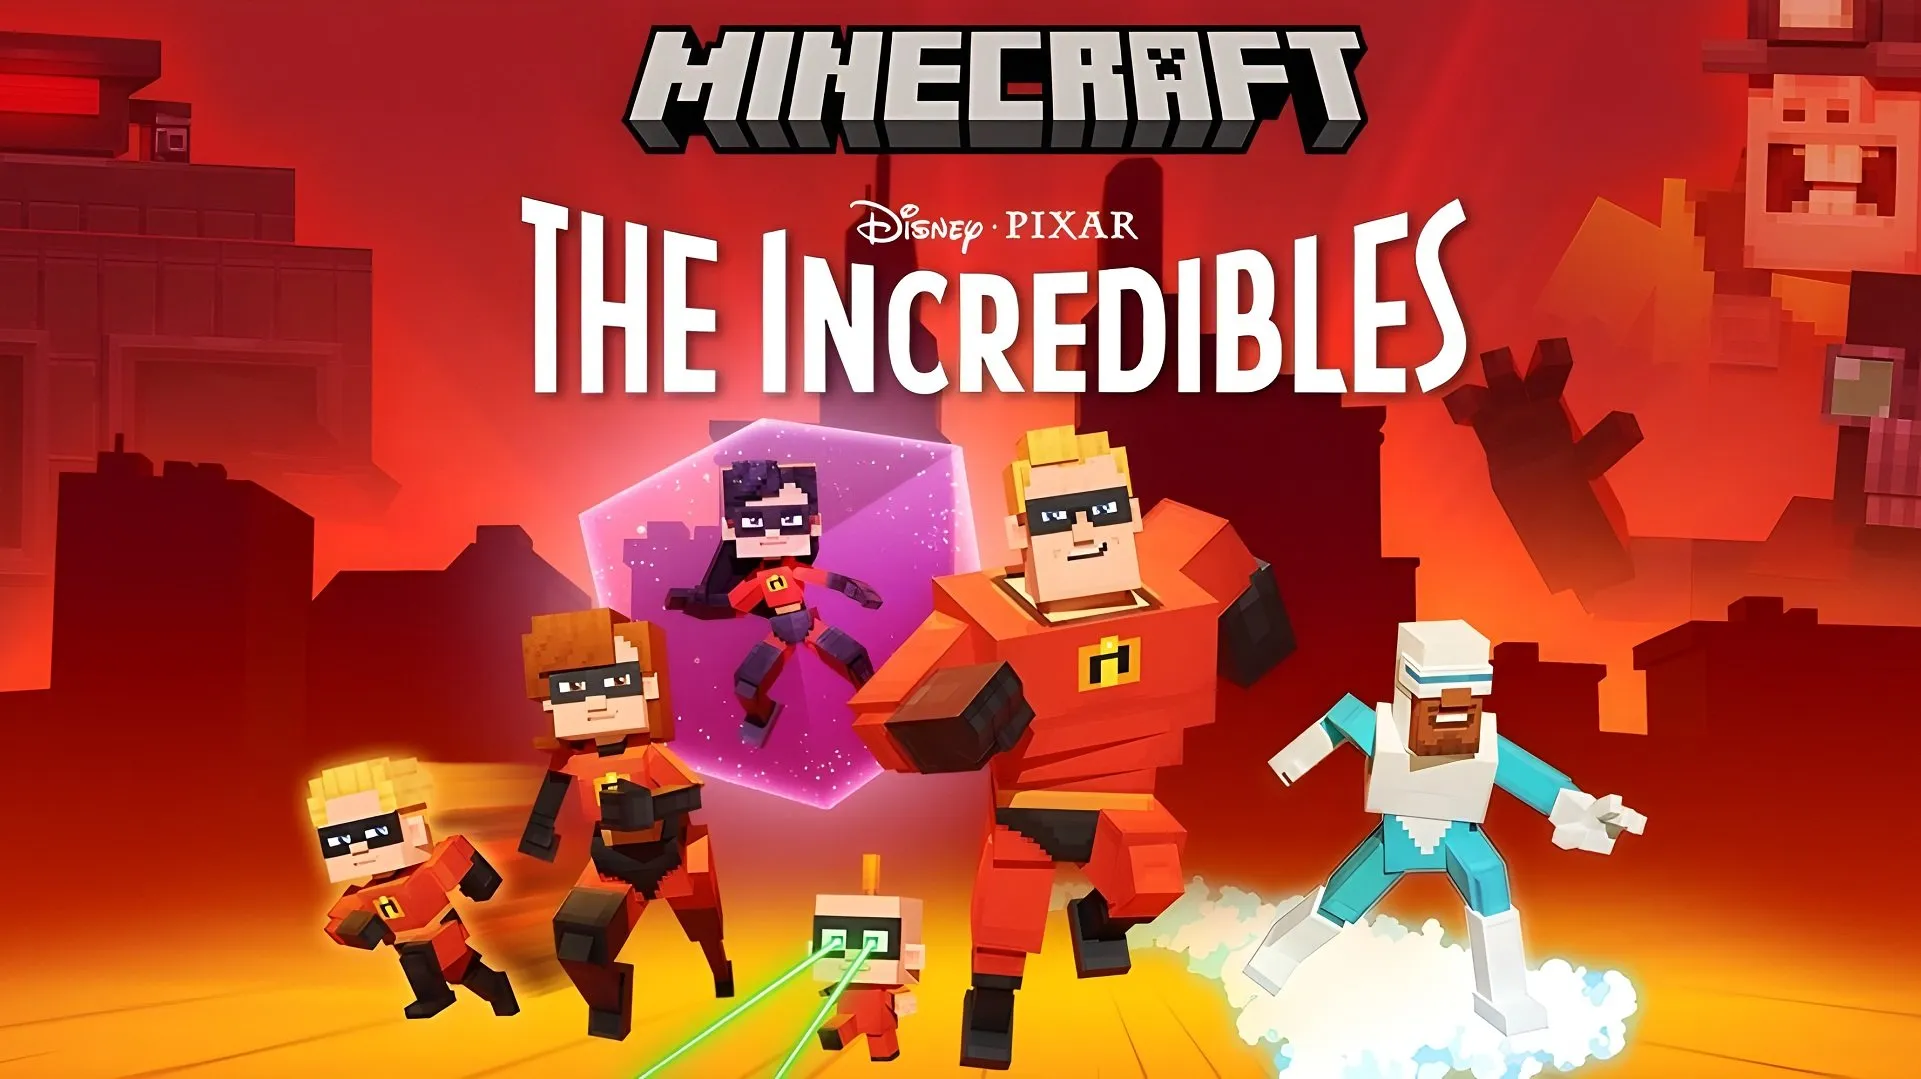 The Incredibles Minecraft